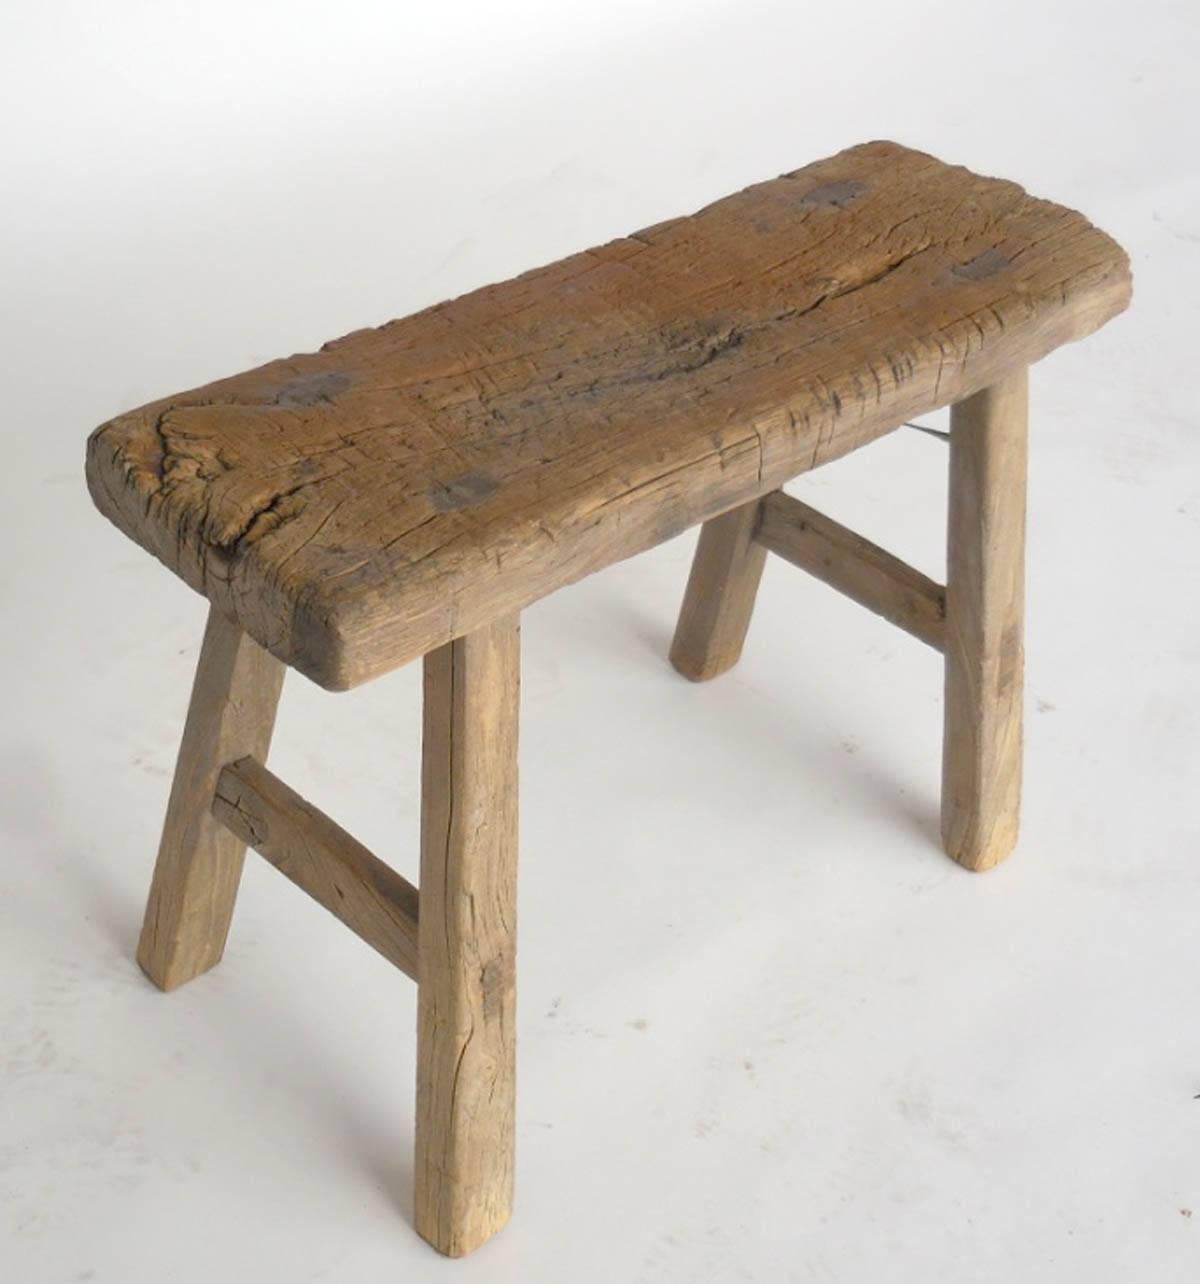 Primitive 19th Century Chinese Bench or Stool in Elm Wood